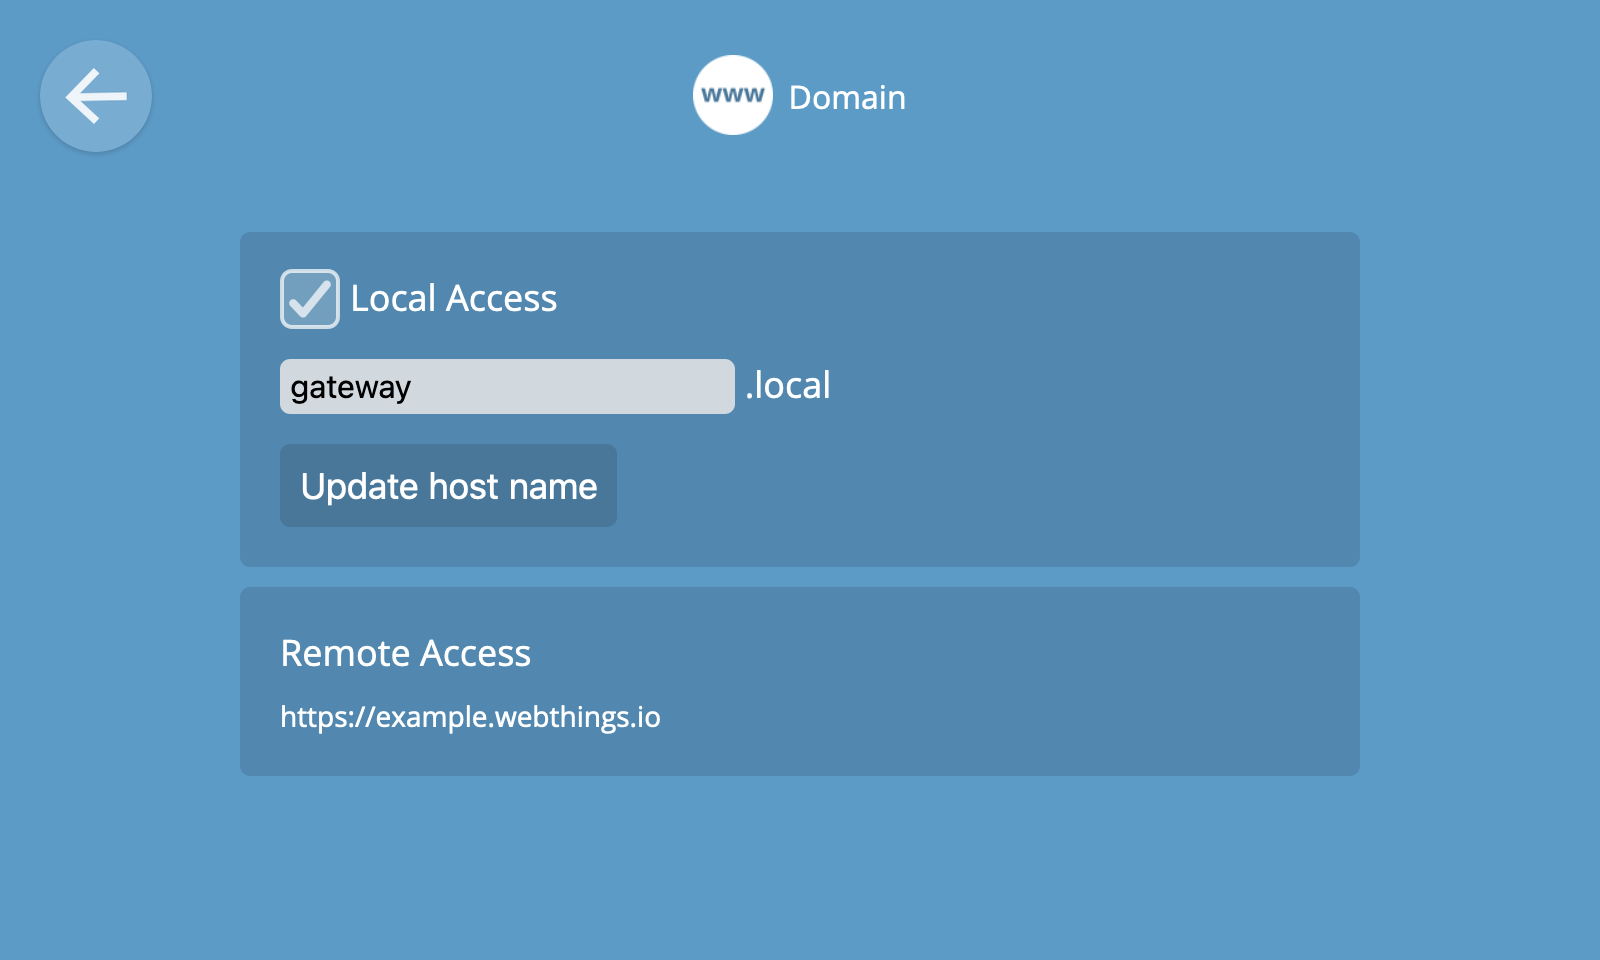 Screenshot showing the domain settings view, with a text box and checkbox to configure the local domain, and information about remote access